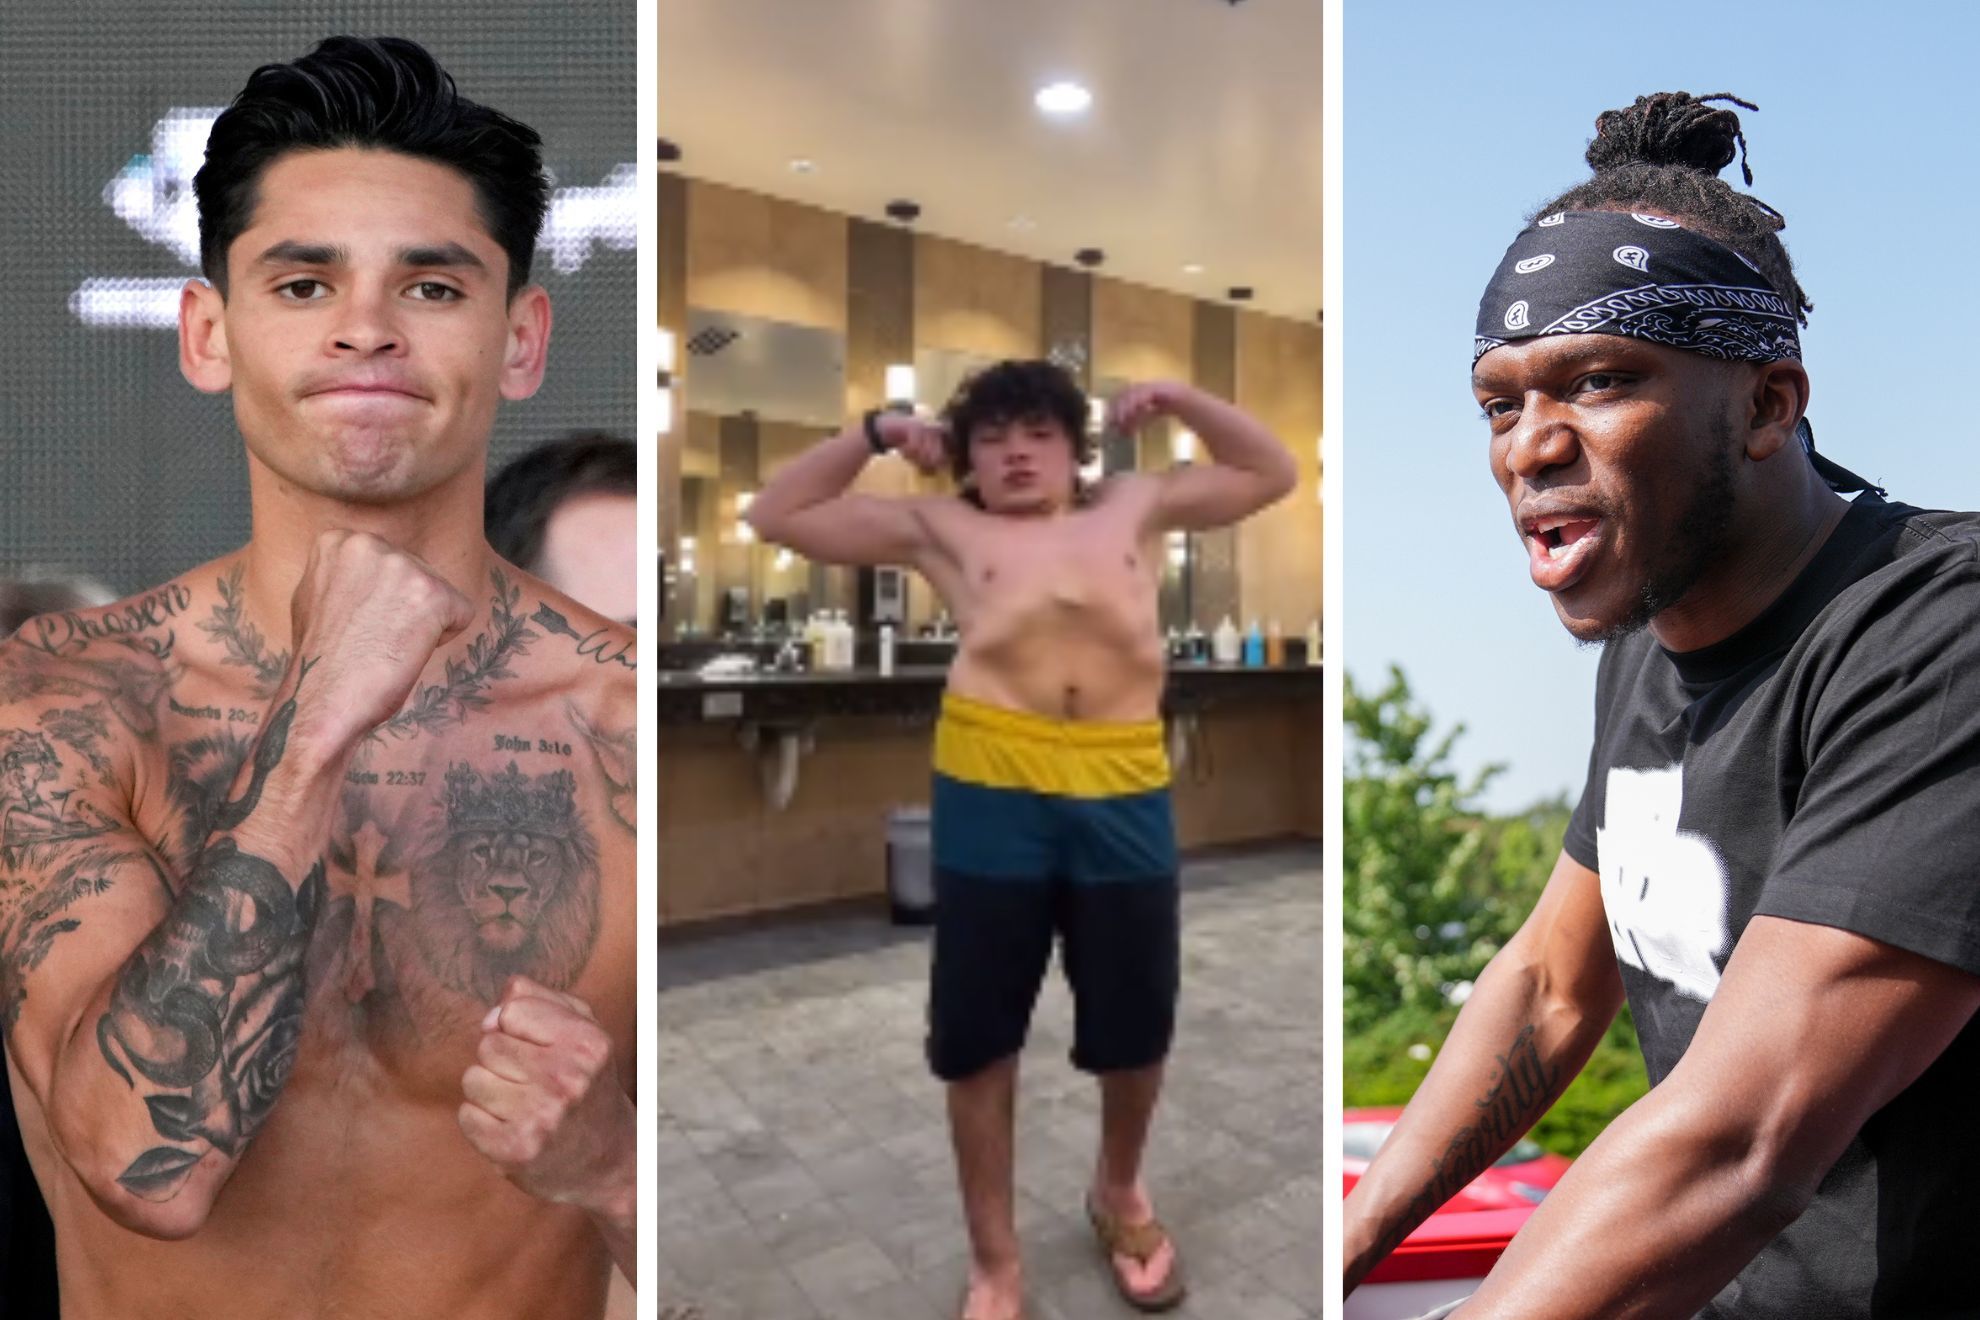 Ryan Garcia the latest fighter to call out KSI for mocking disabled person